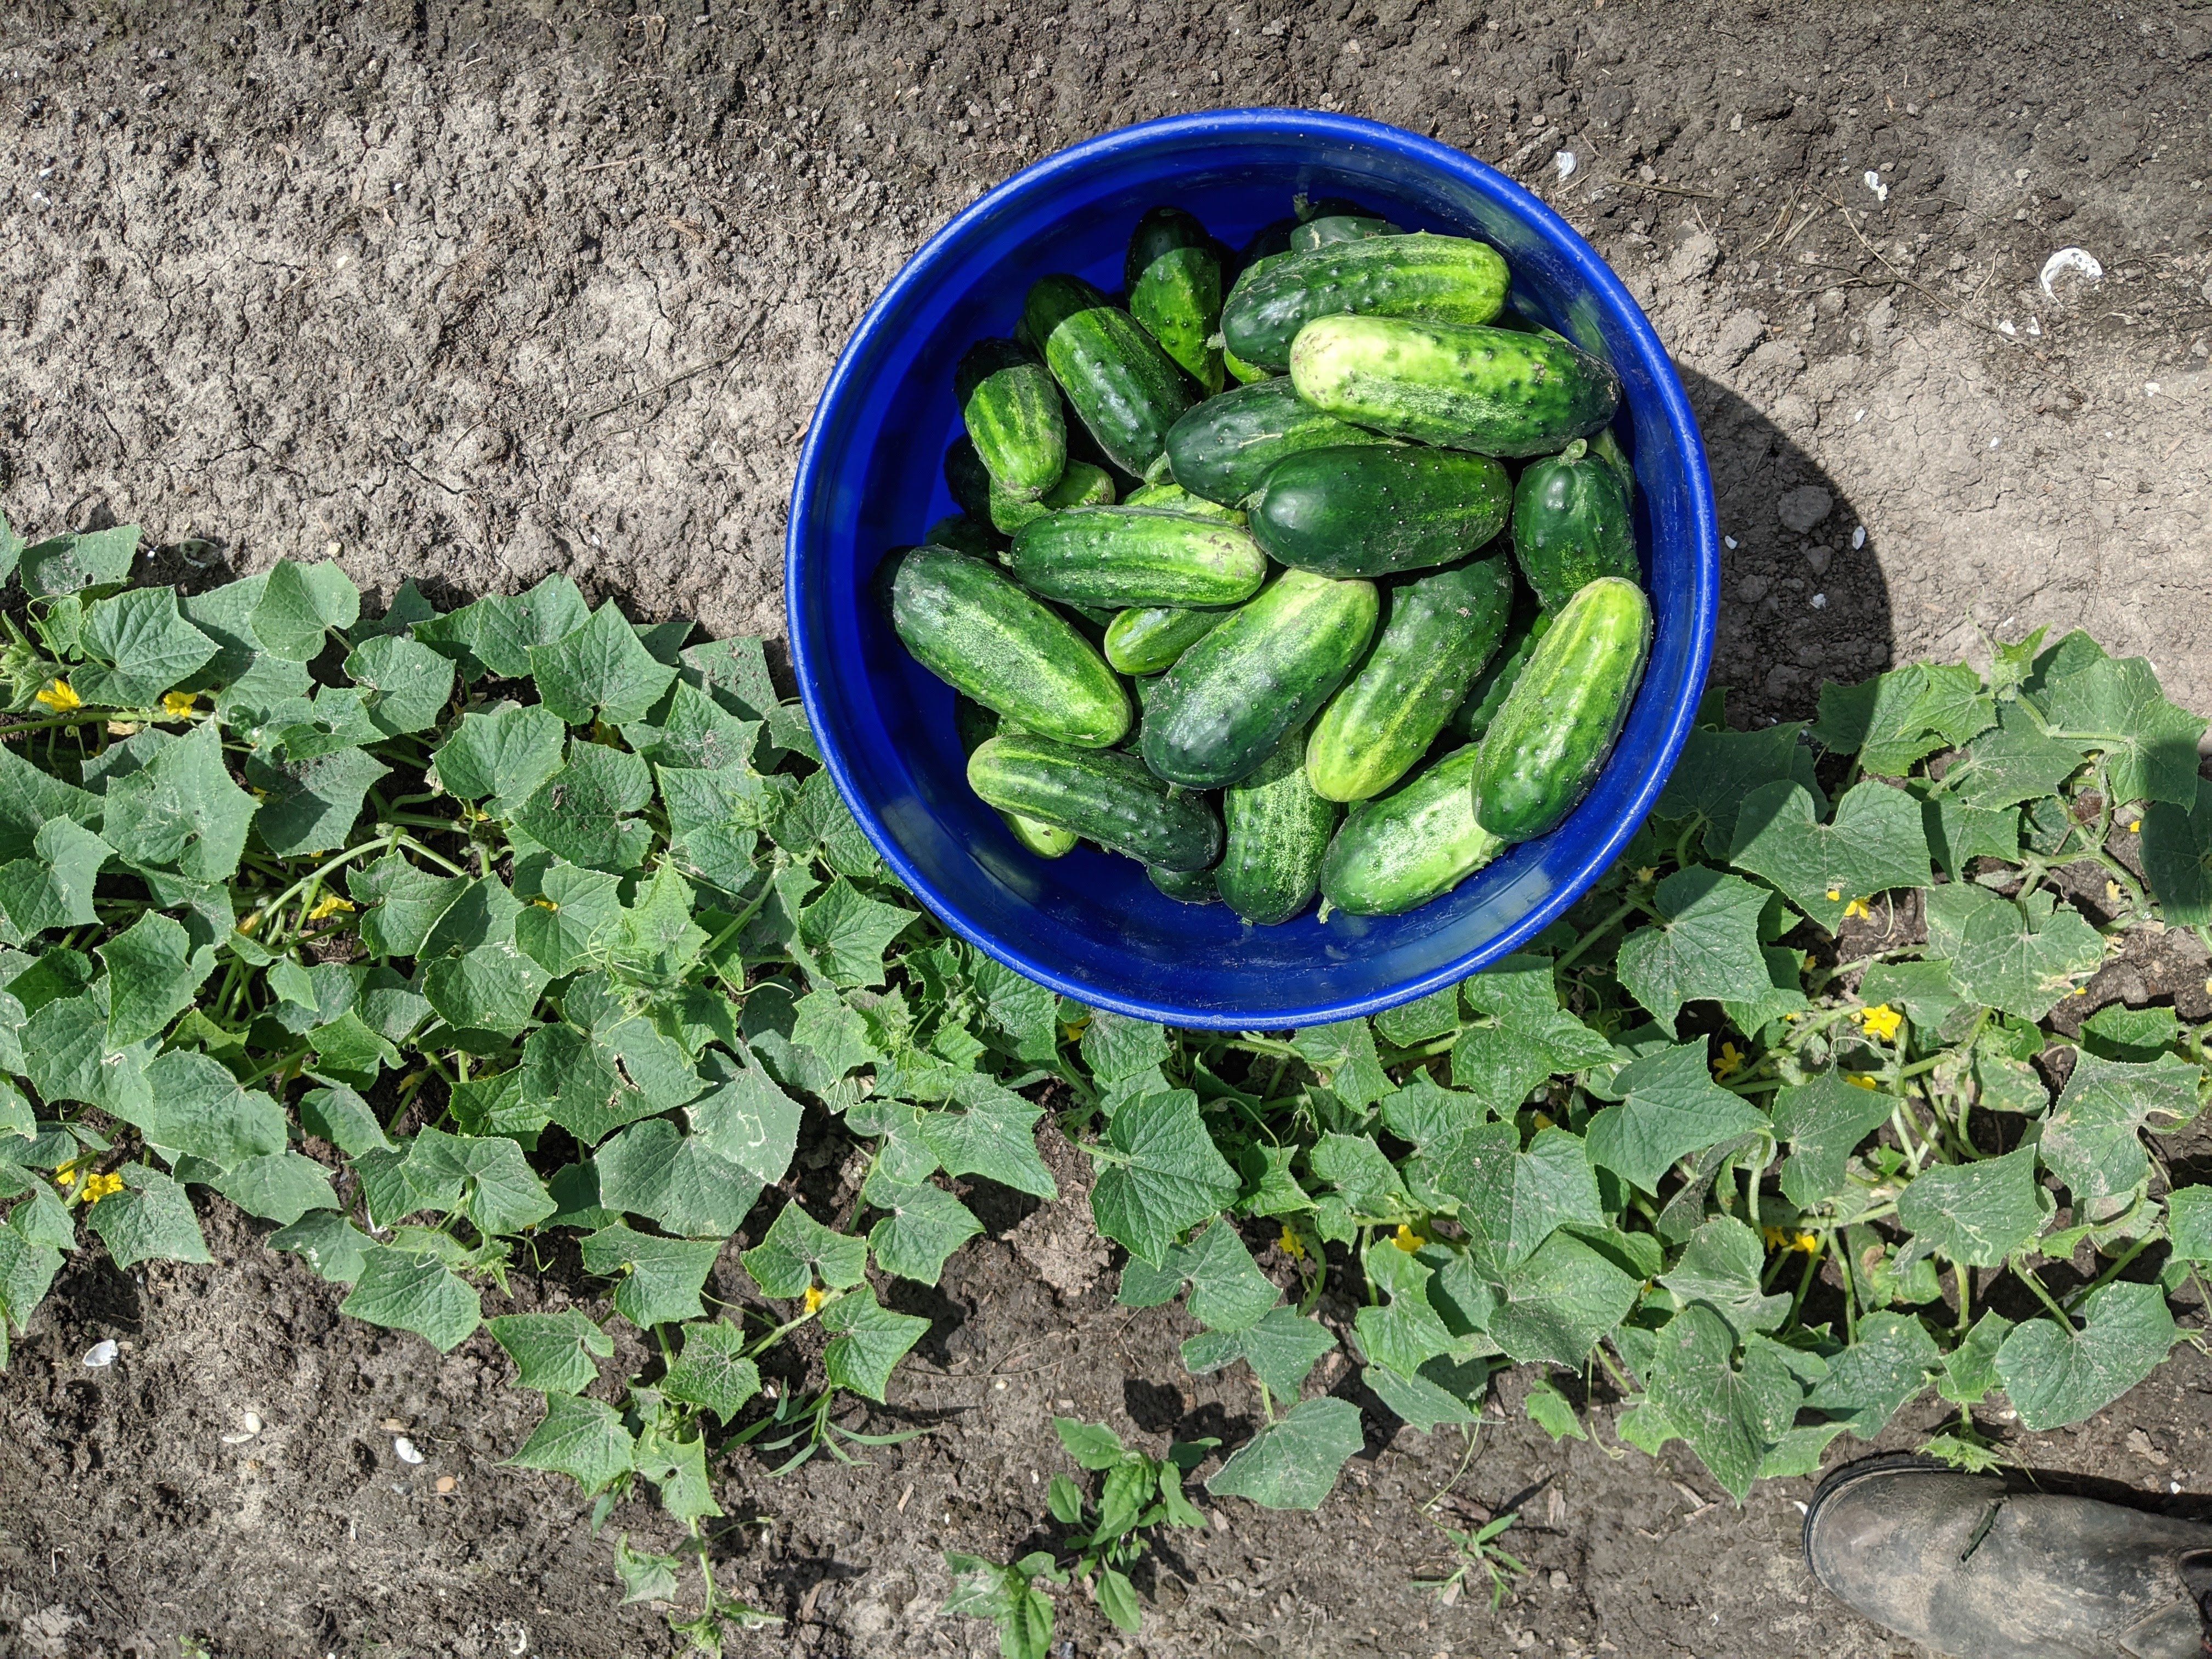 Previous Happening: Pickling Cukes are King